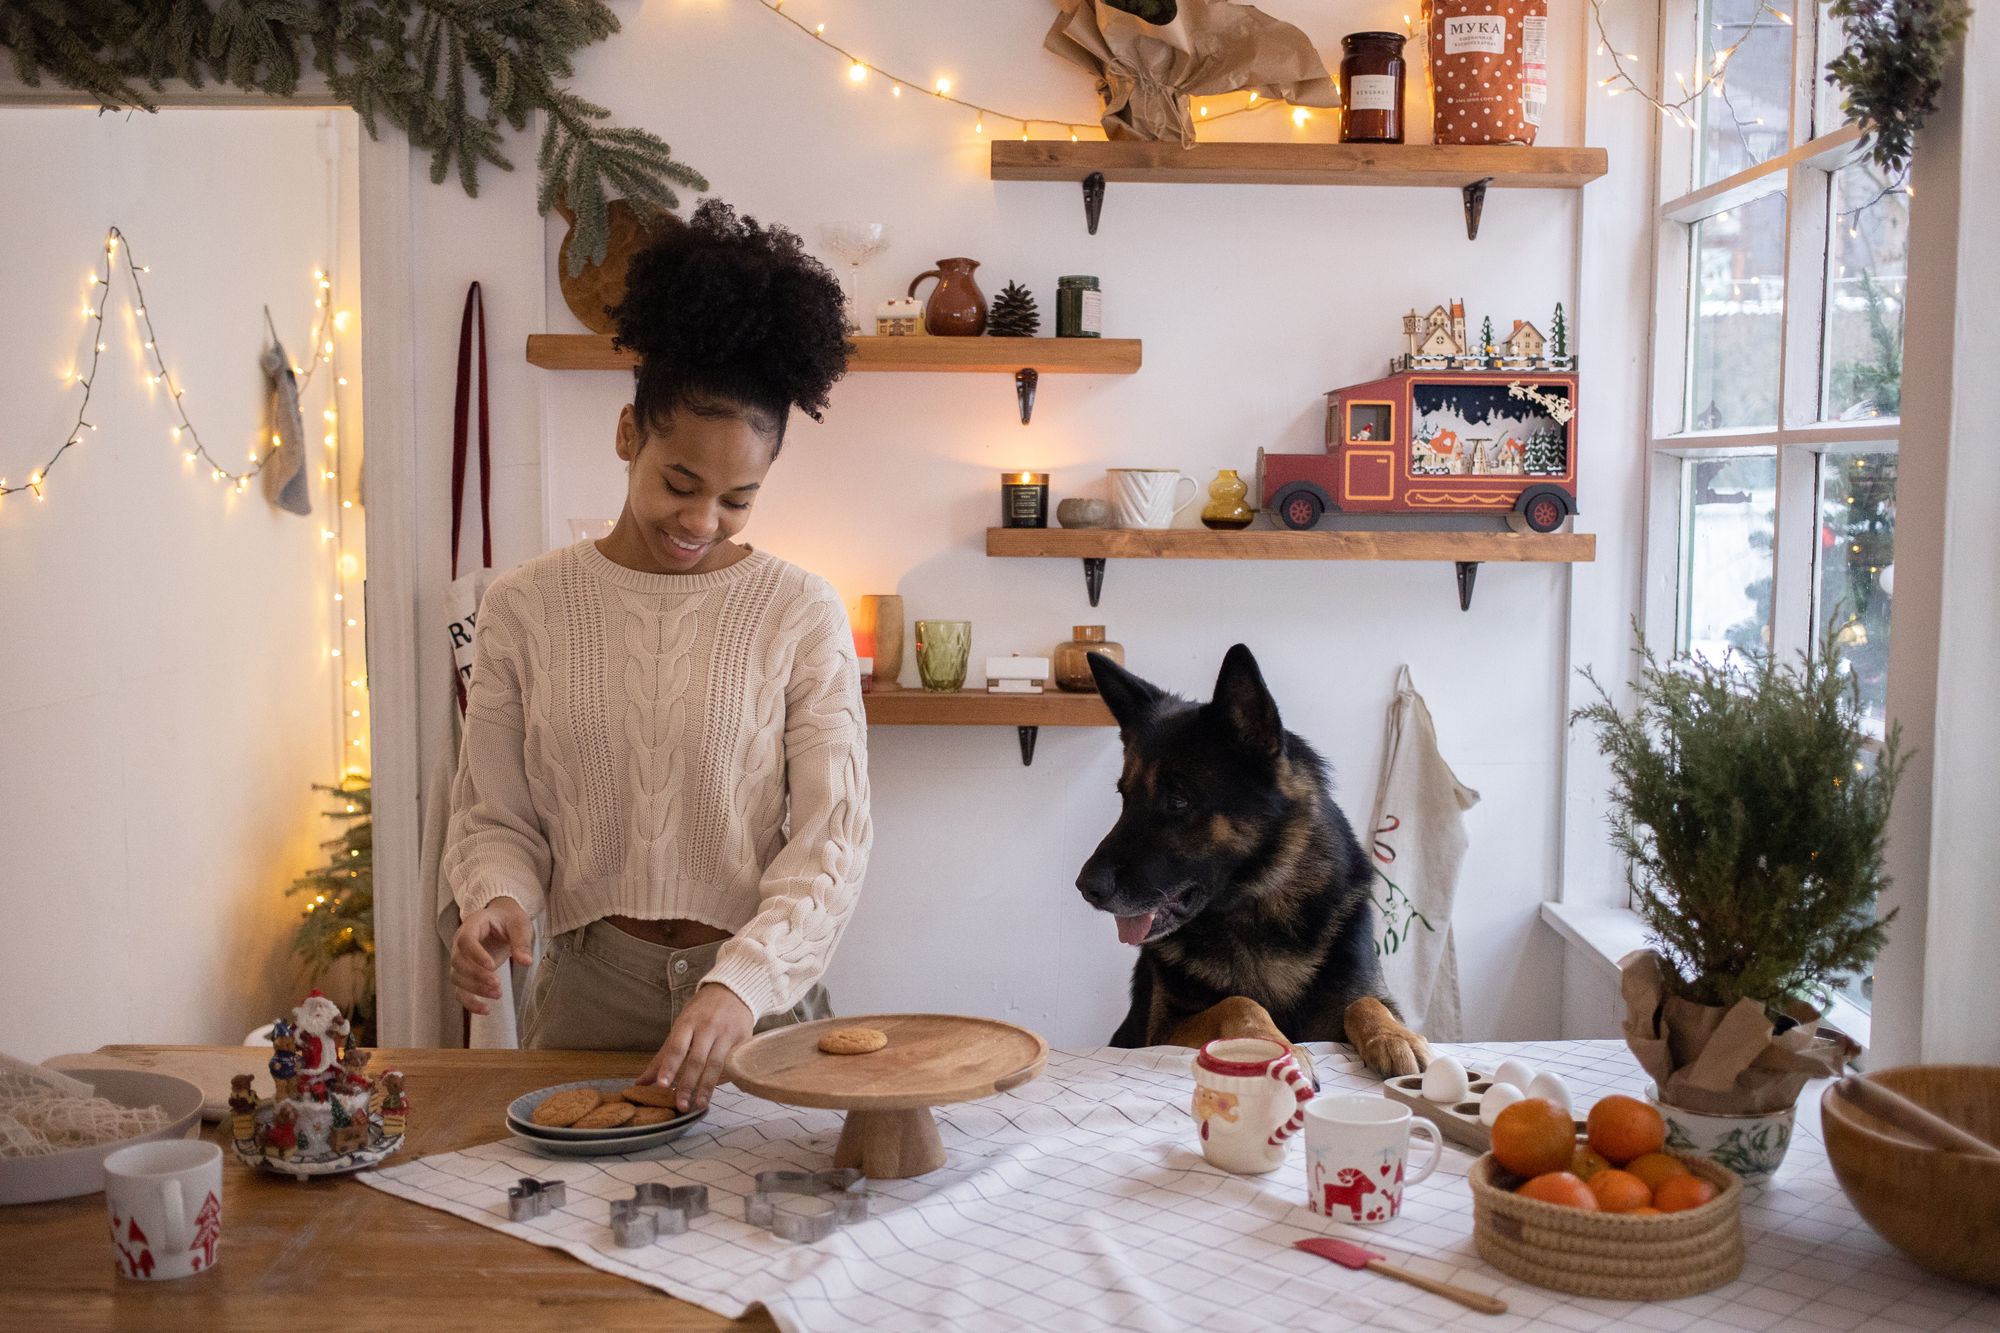 Cooking Christmas treats with your dog